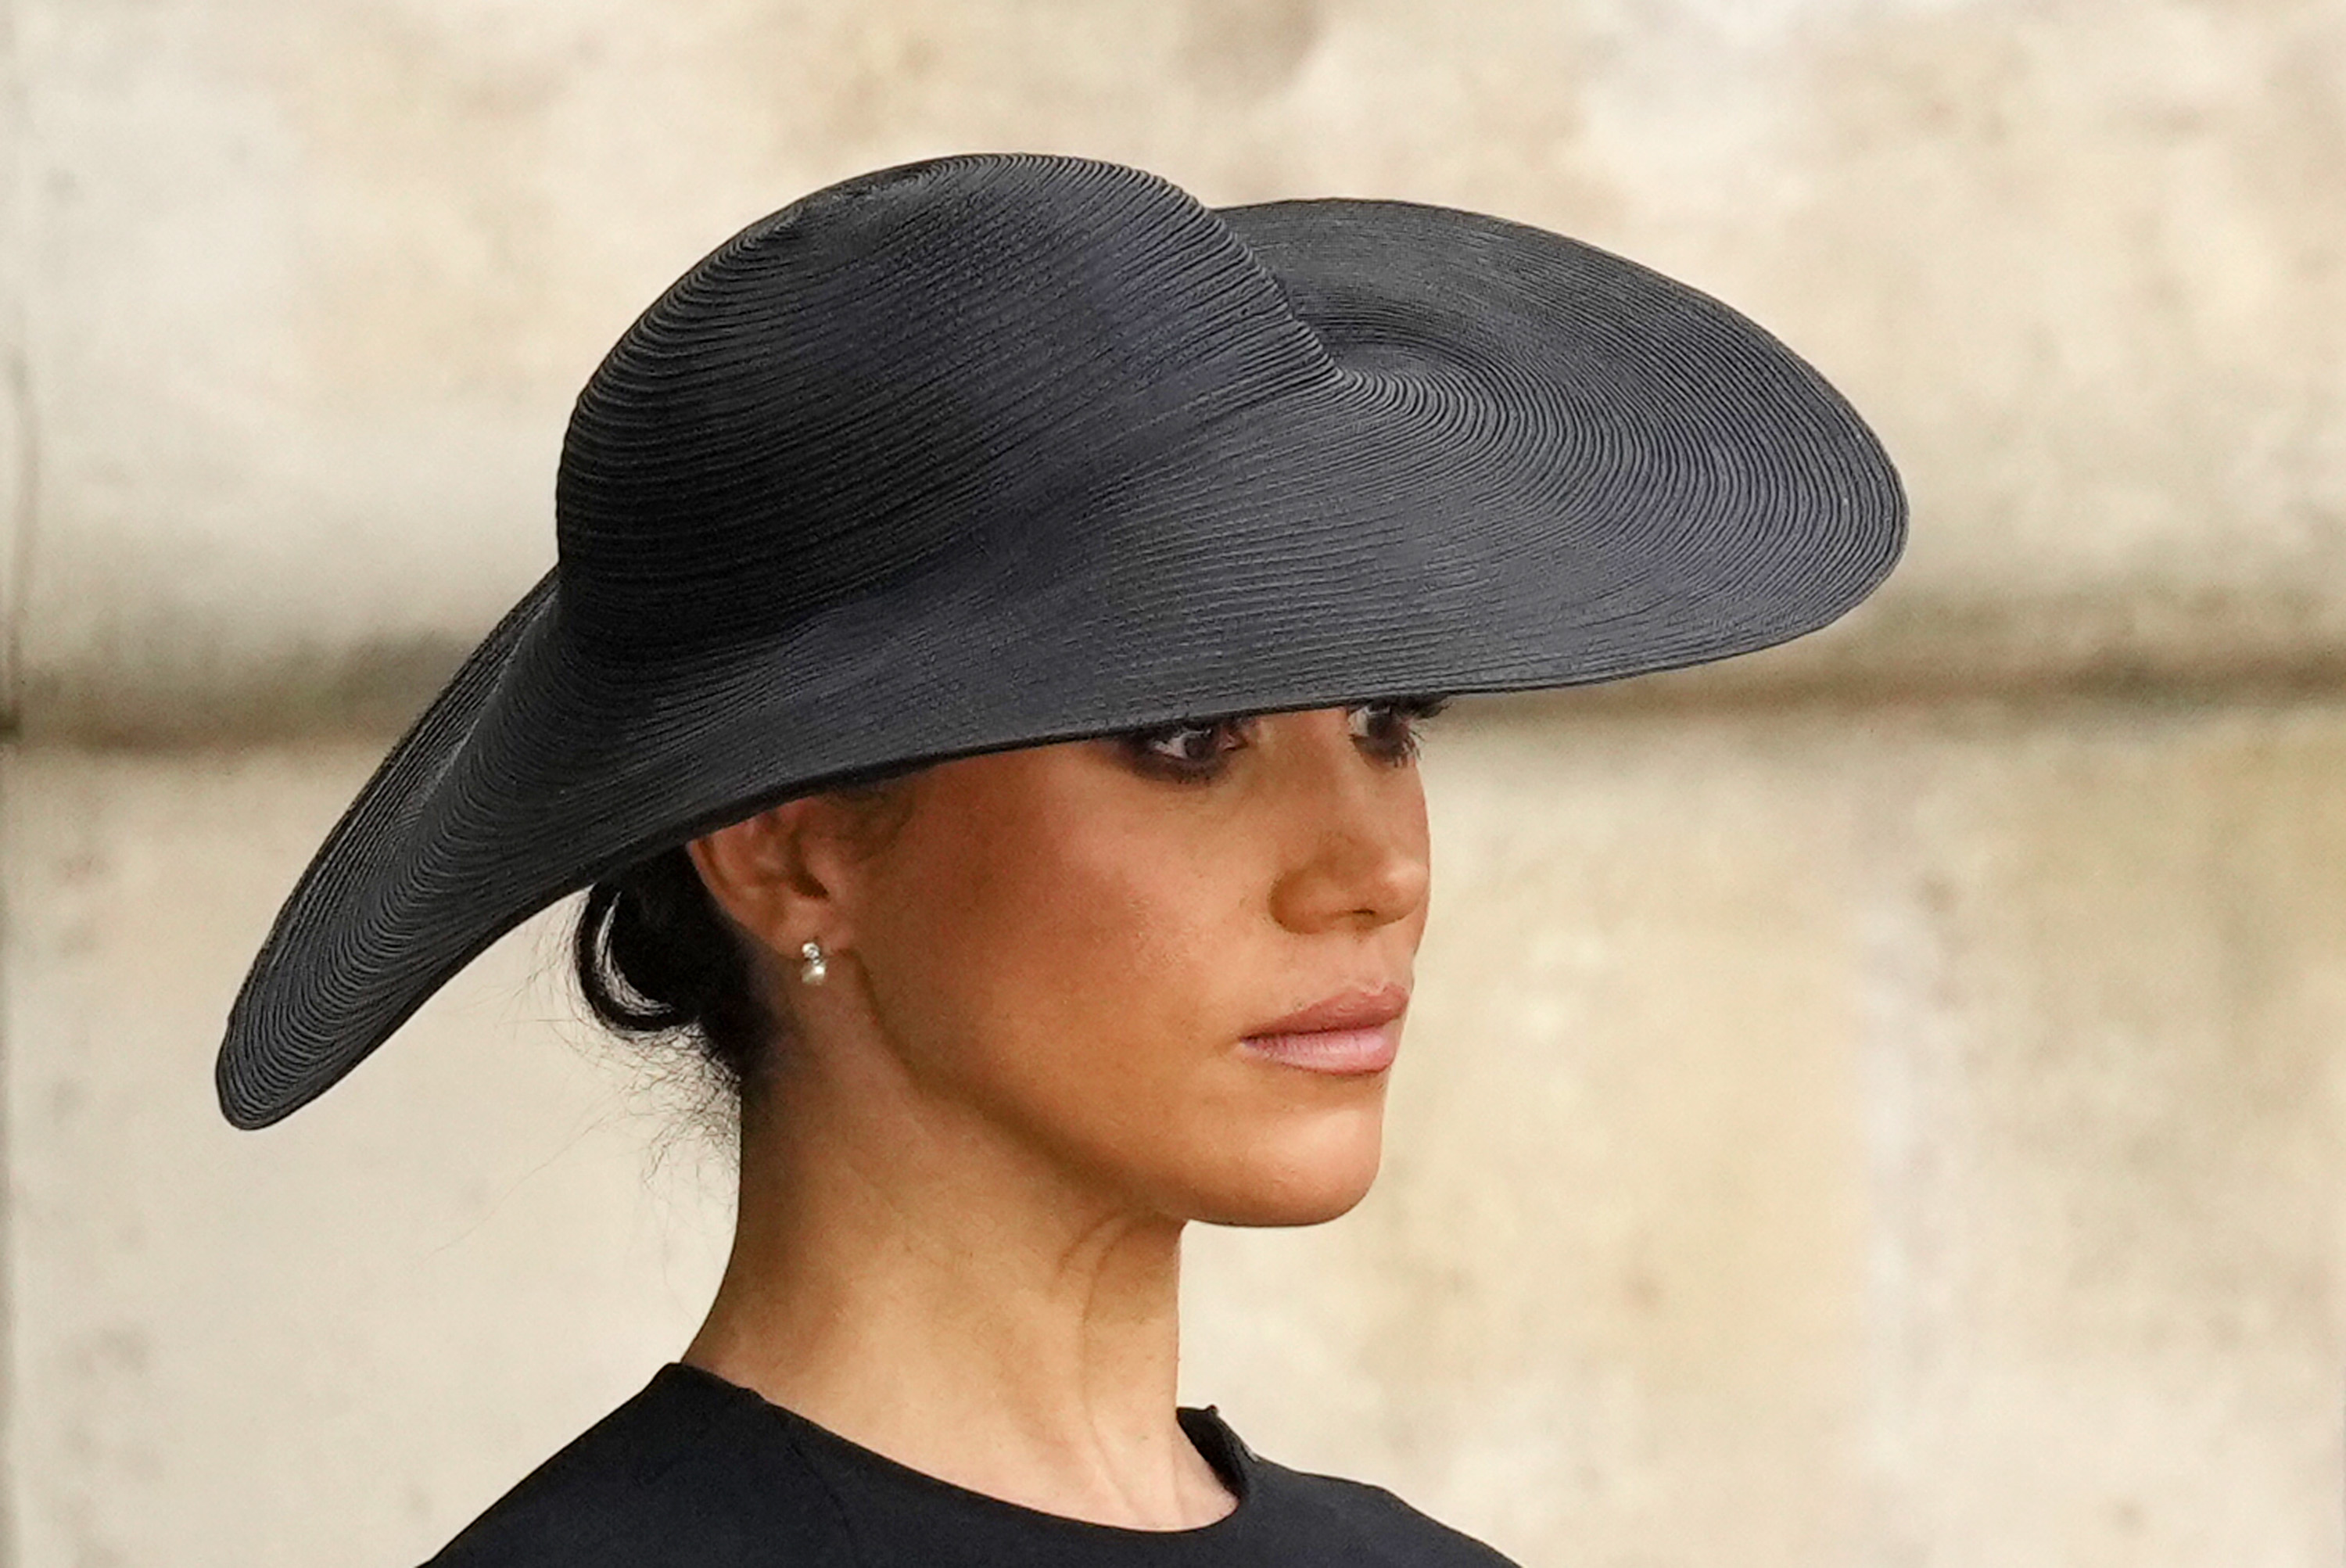 Meghan Markle is photographed at Westminster Abbey during The State Funeral of Queen Elizabeth II